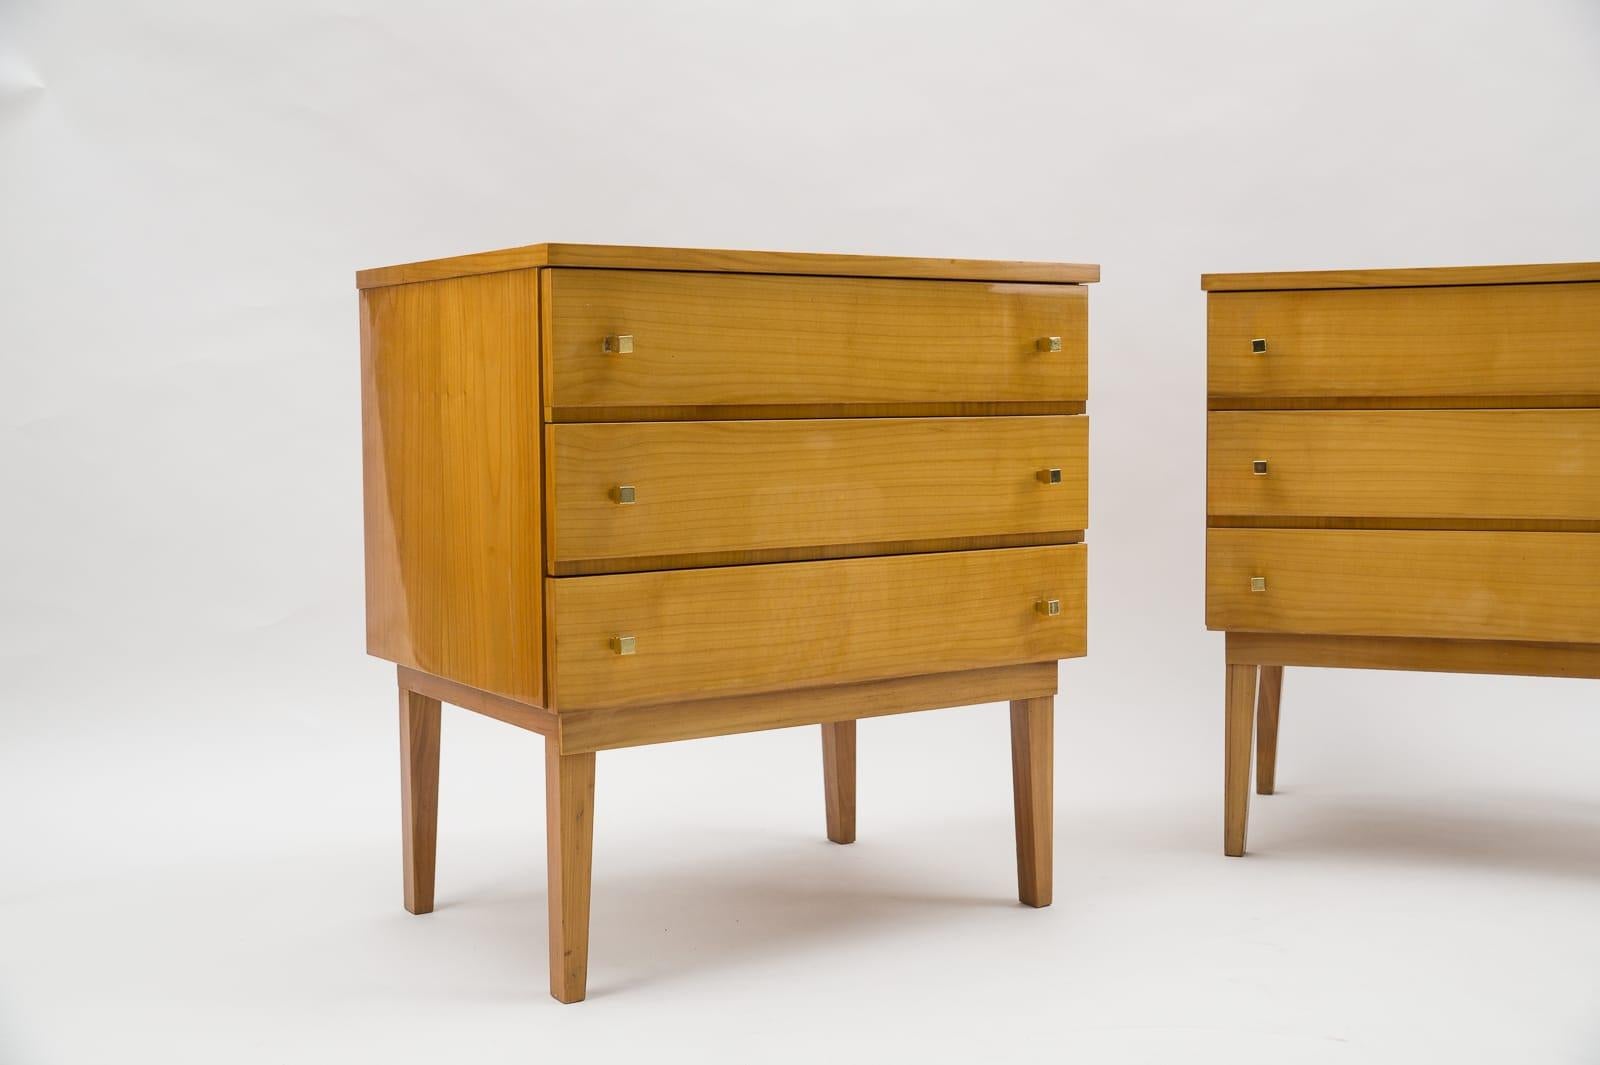  Mid-Century Modern Brass and Wood Nightstands, 1950s, Set of 2 For Sale 5